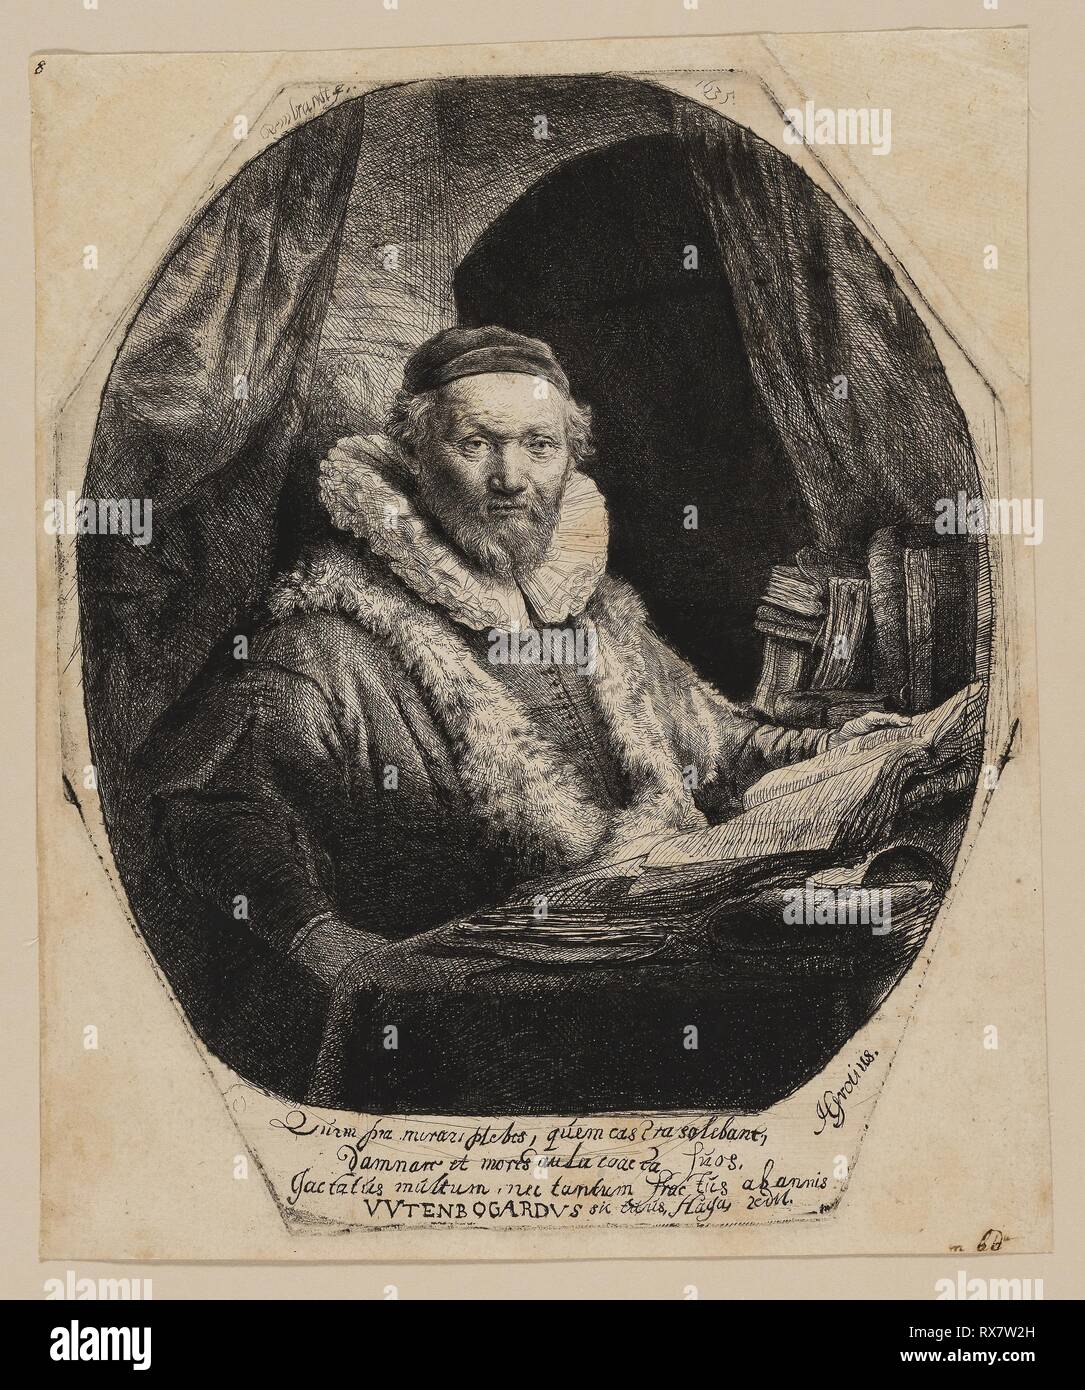 Jan Uytenbogaert, Preacher of the Remonstrants. Rembrandt van Rijn; Dutch, 1606-1669. Date: 1634-1635. Dimensions: 225 x 187 mm (image/plate); 239 x 197 mm (sheet). Etching and drypoint in black on buff laid paper. Origin: Holland. Museum: The Chicago Art Institute. Author: REMBRANDT HARMENSZOON VAN RIJN. Stock Photo